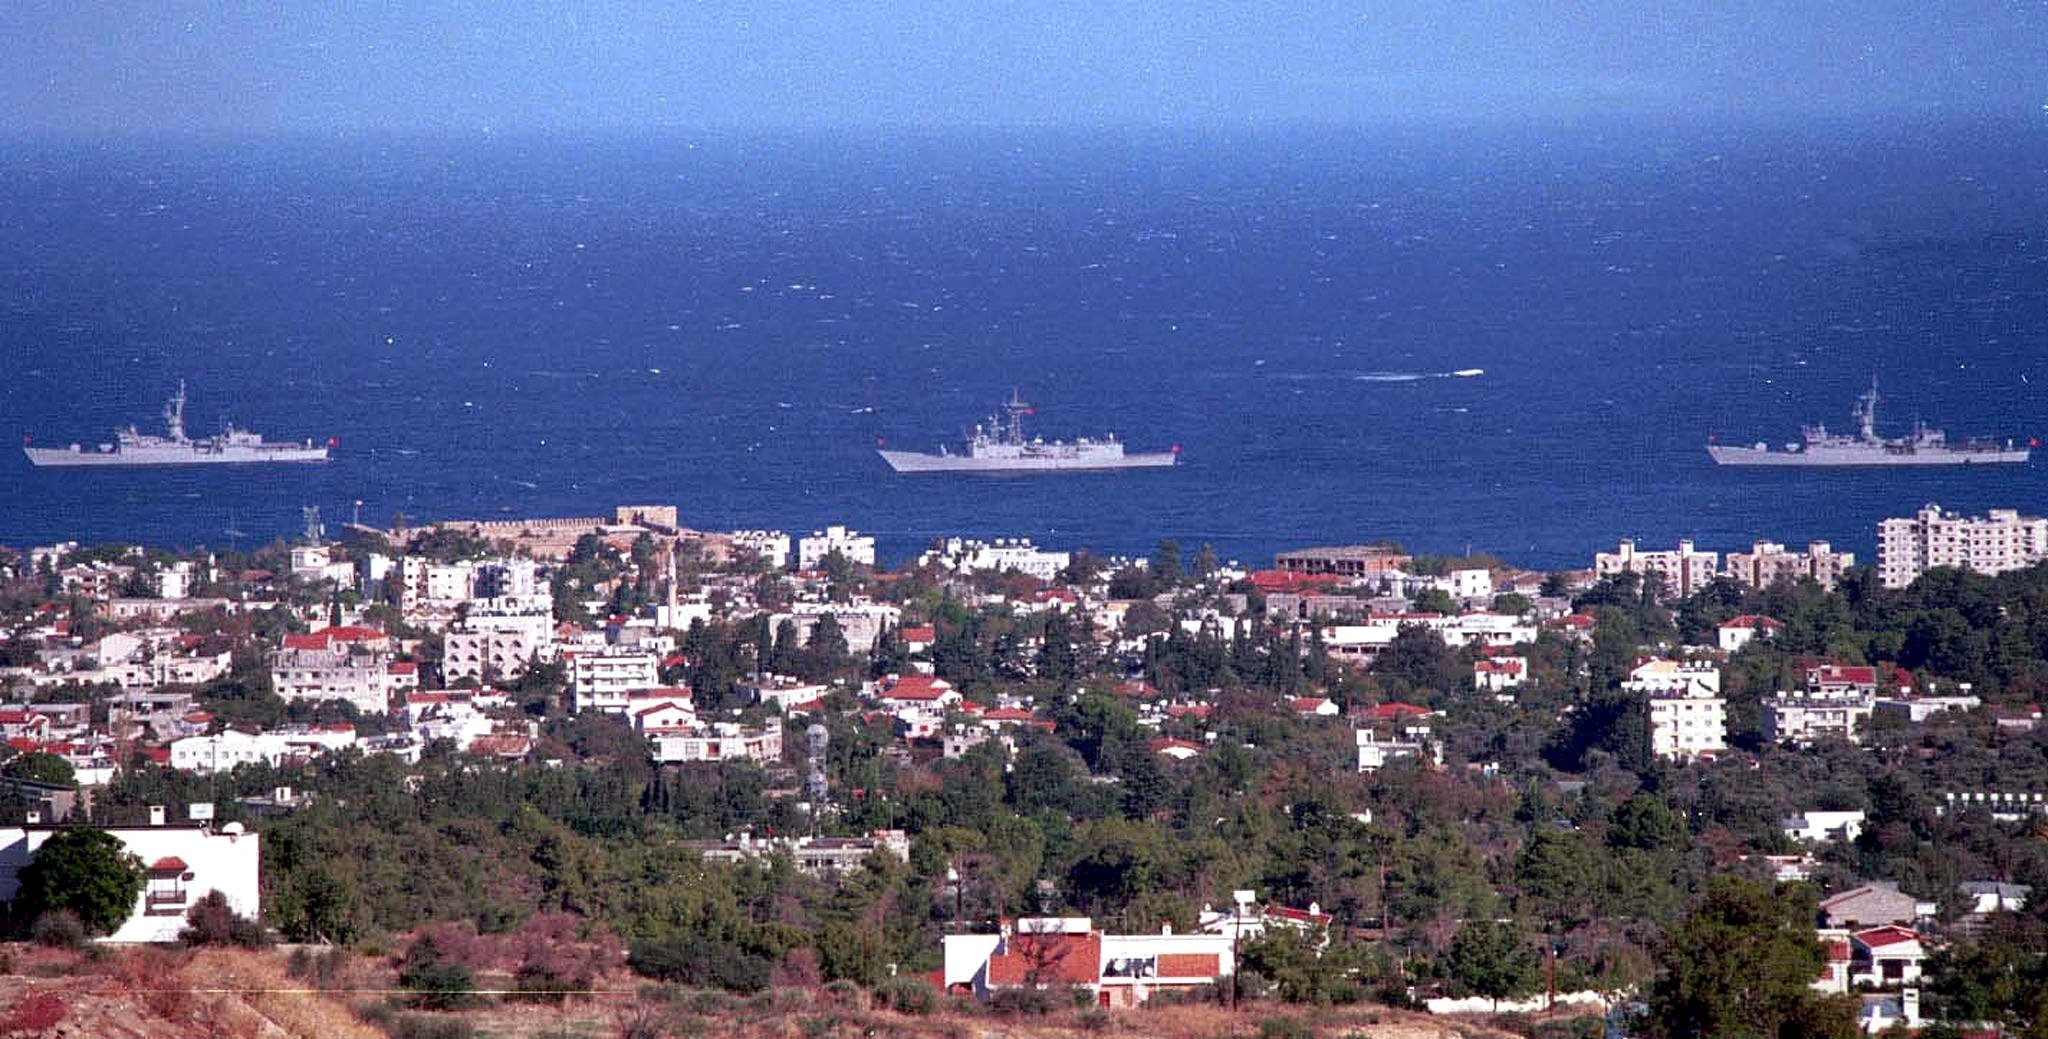 CYP02-19991124-KYRENIA, CYPRUS: Three Turkish Navy frigates as part of a fleet of six warships, arriving in the northern Cypriot port of Kyrenia on Wednesday, 24 November 1999, where military manoeuvres are planned for the next days, according to a Turkish Cypriot military official. Four frigates, one submarine and one tanker are taking part in military manoeuvres between 25-27 November carried out in international waters off northern Cyprus in the Mediterranean. EPA PHOTO EPA/-/kr